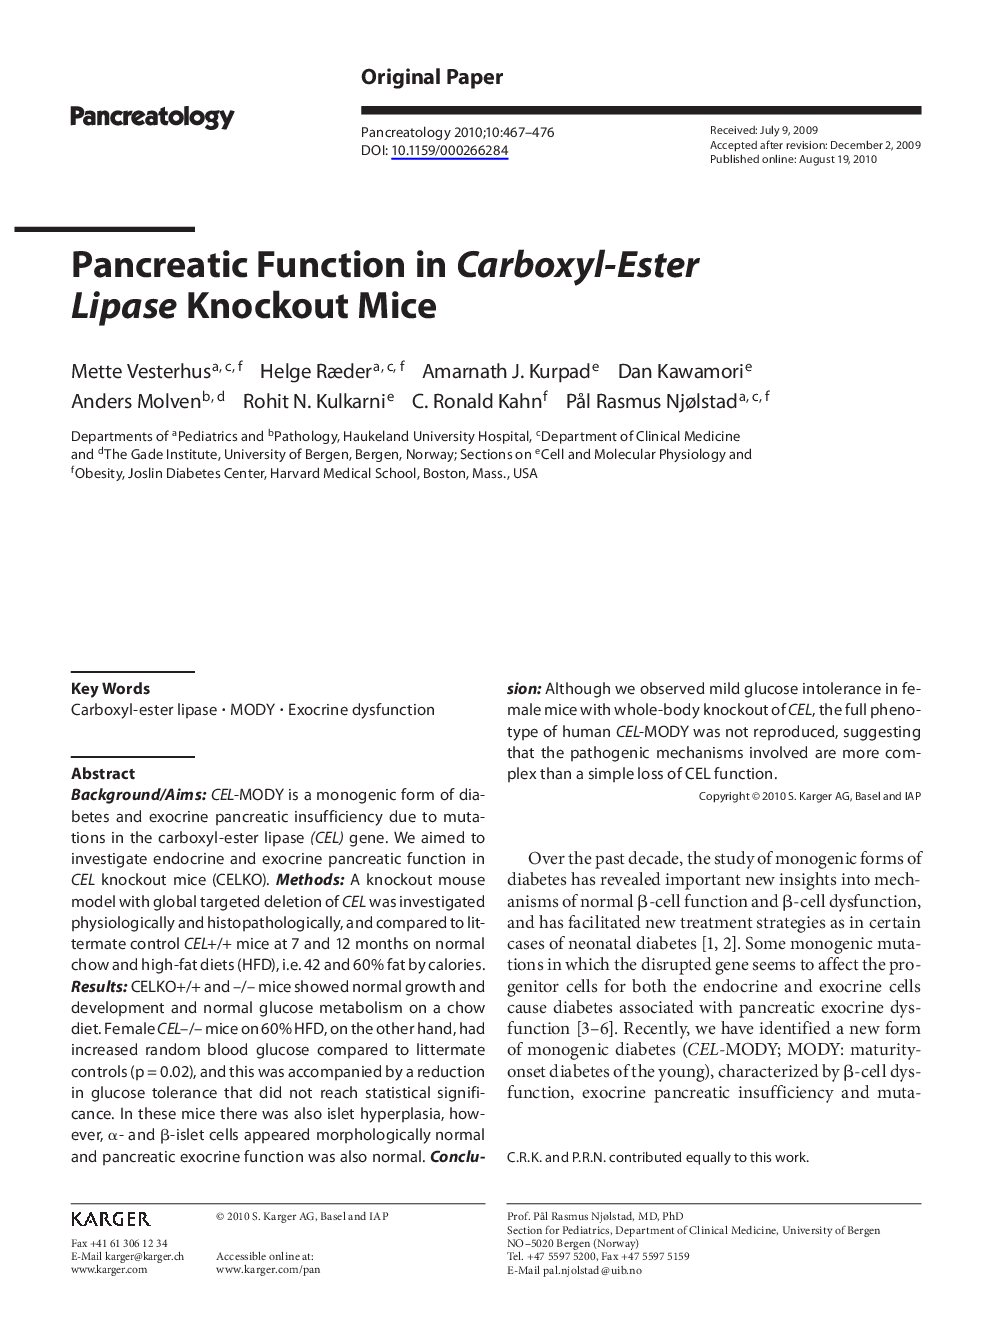 Pancreatic Function in Carboxyl-Ester Lipase Knockout Mice